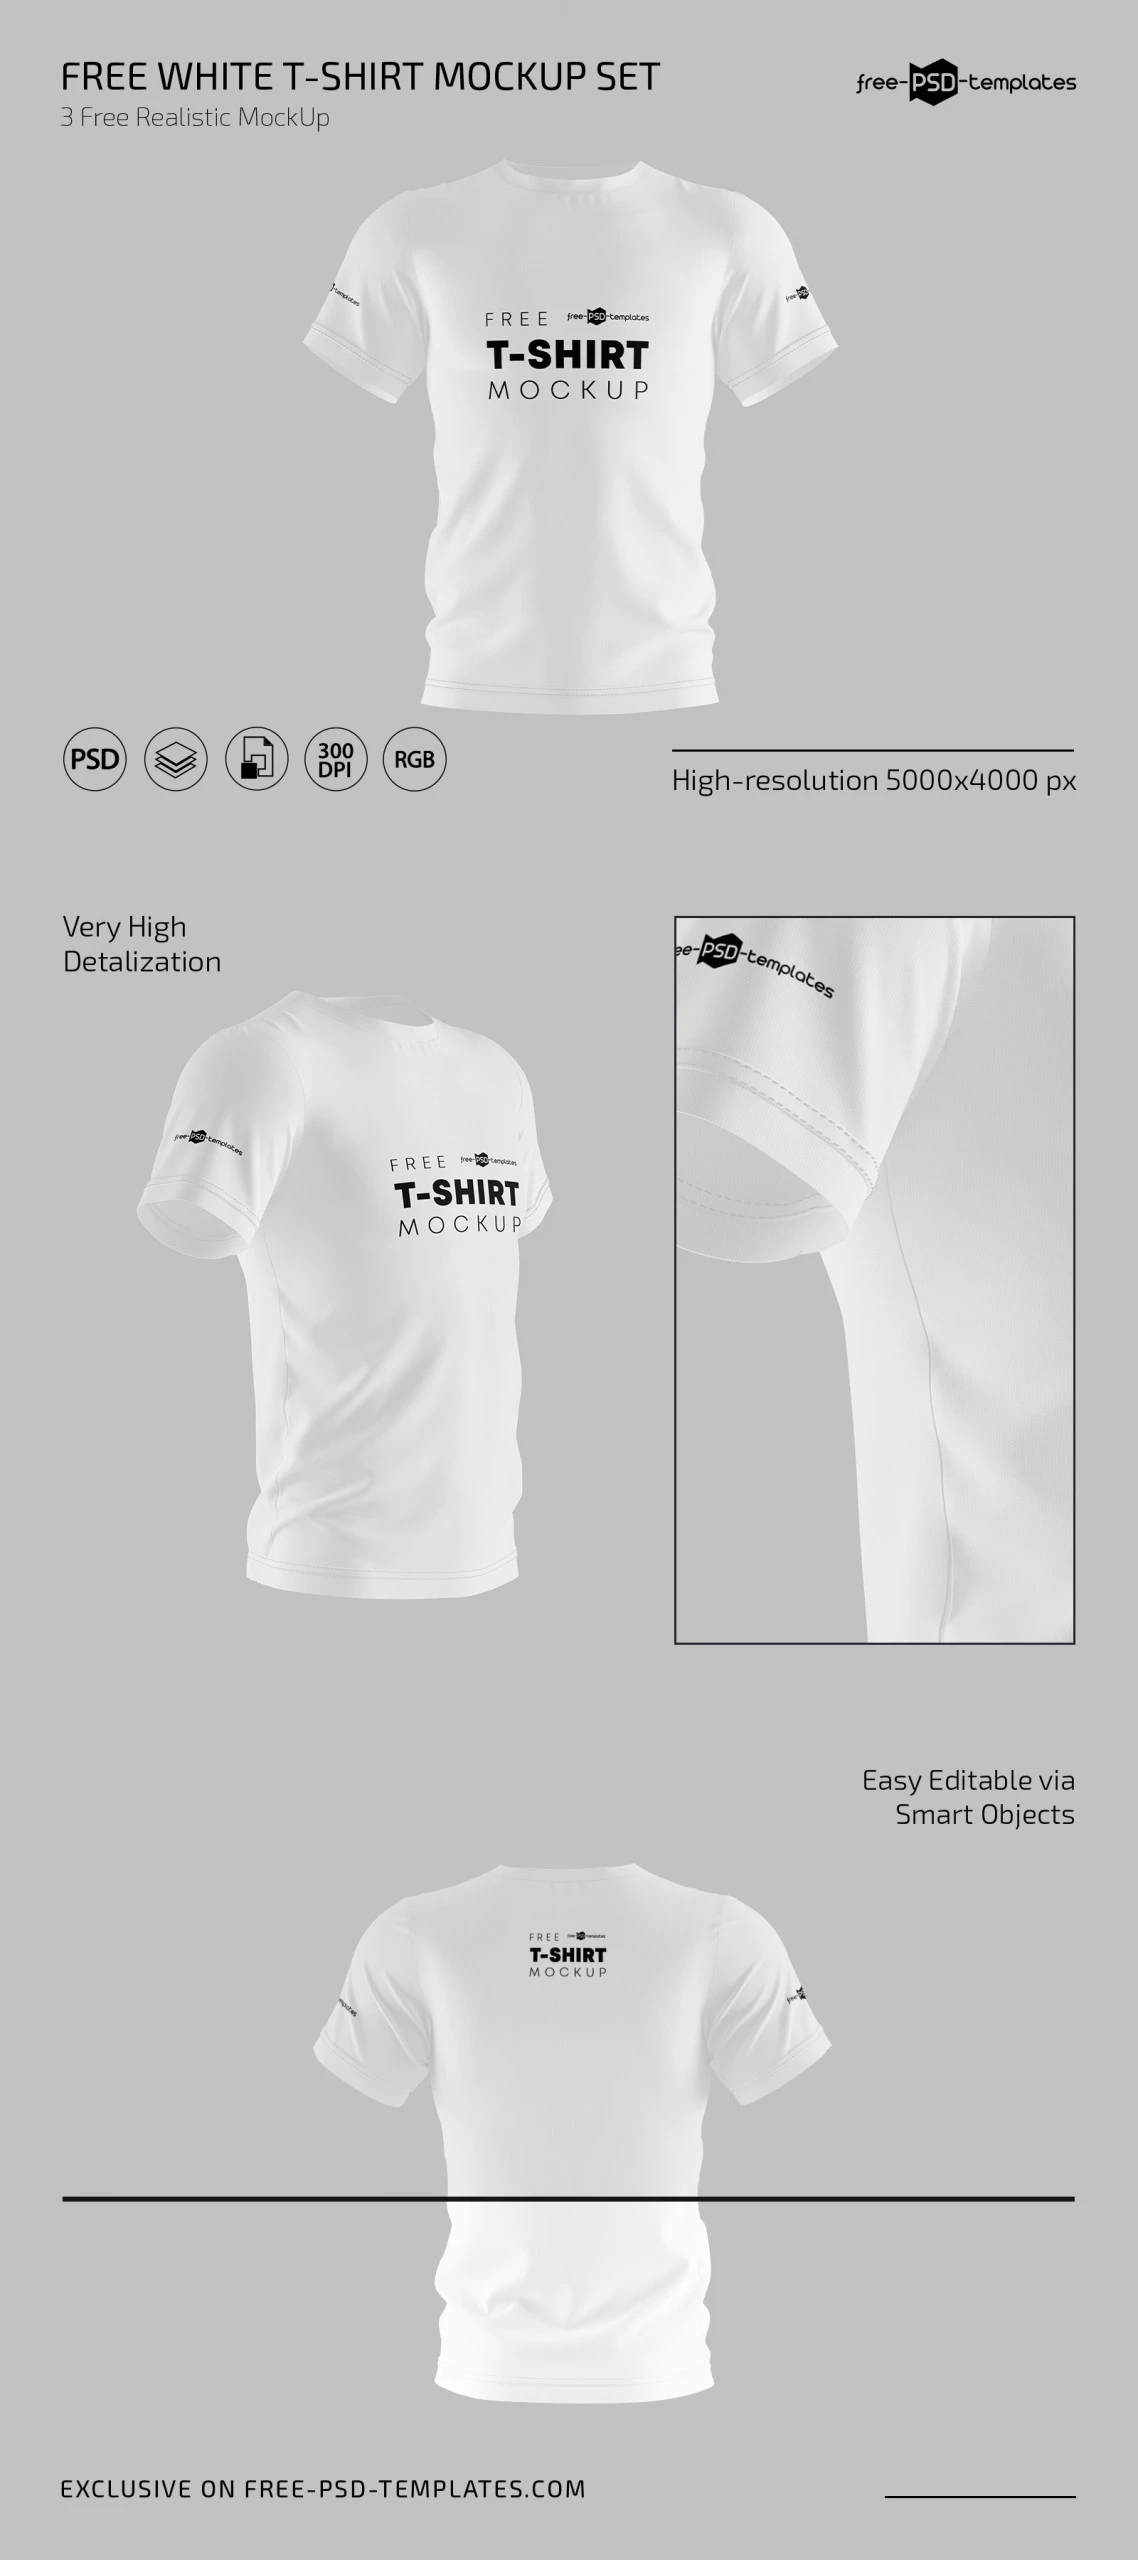 Free T-Shirt Mockup for Photoshop (PSD)